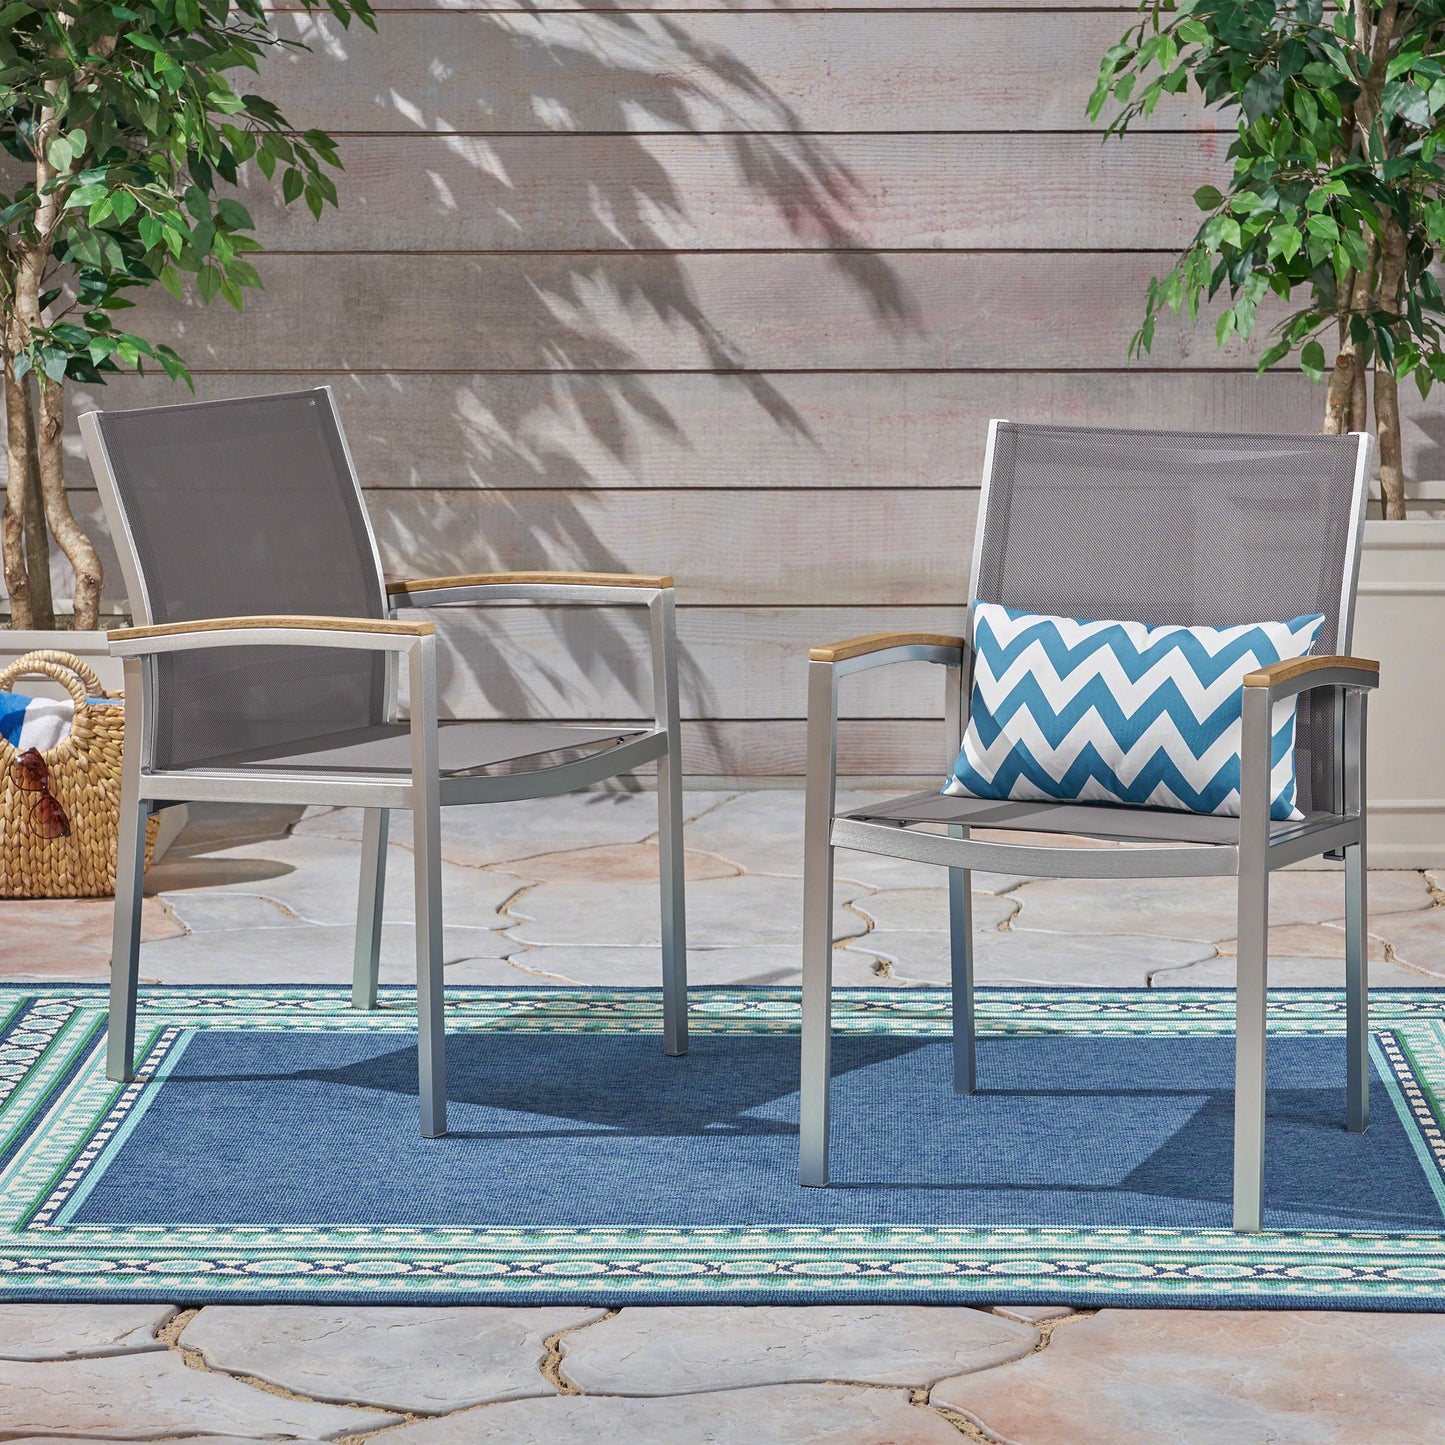 Emma Outdoor Wicker Dining Chair with Aluminum Frame (Set of 2)